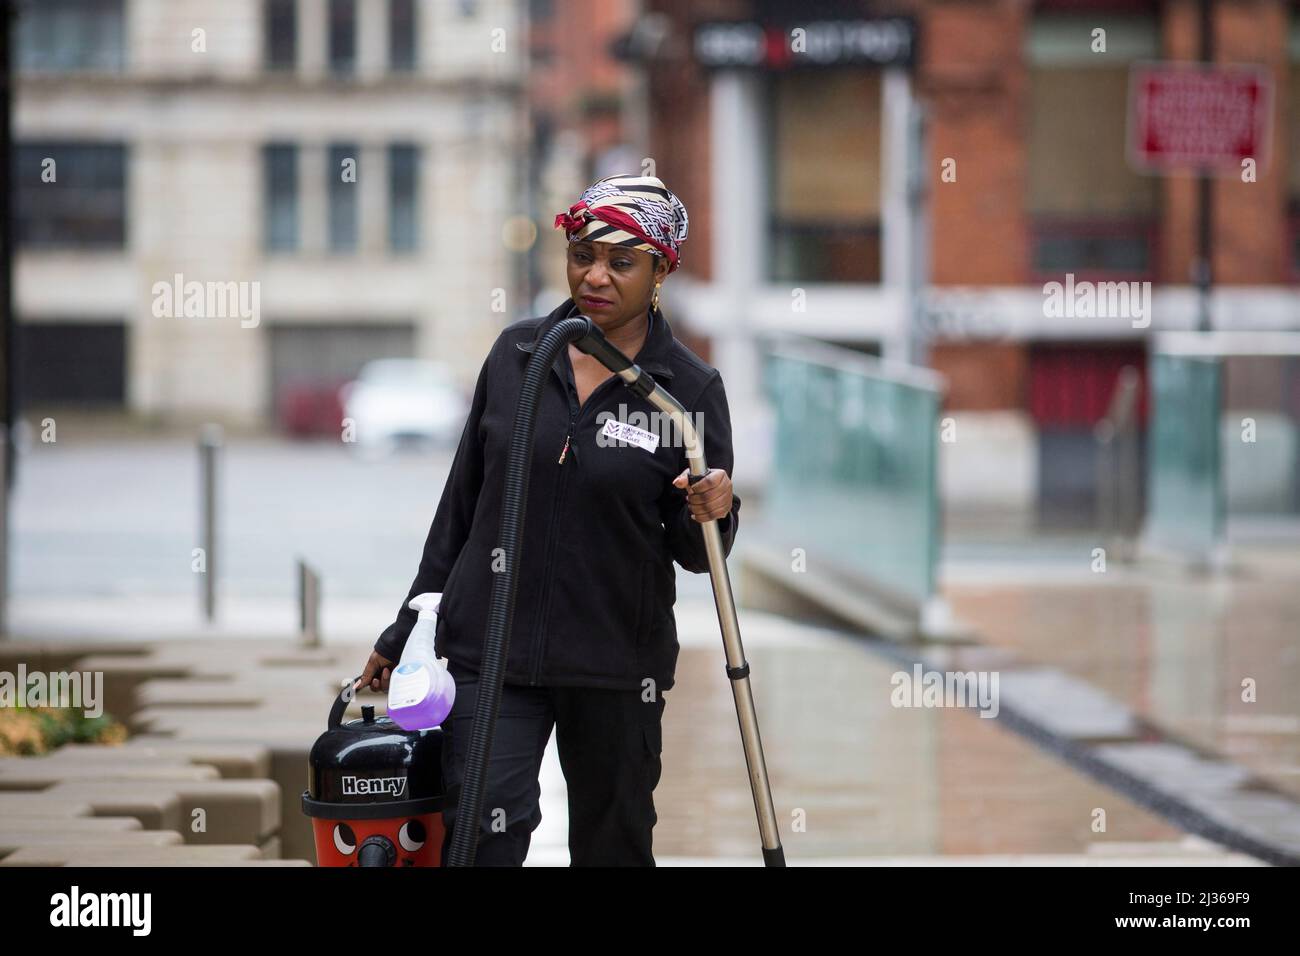 A women of ethnic origin carrying a Henry hoover in a mixed development of flats and offices in Manchester city centre wearing a headscarf. Stock Photo